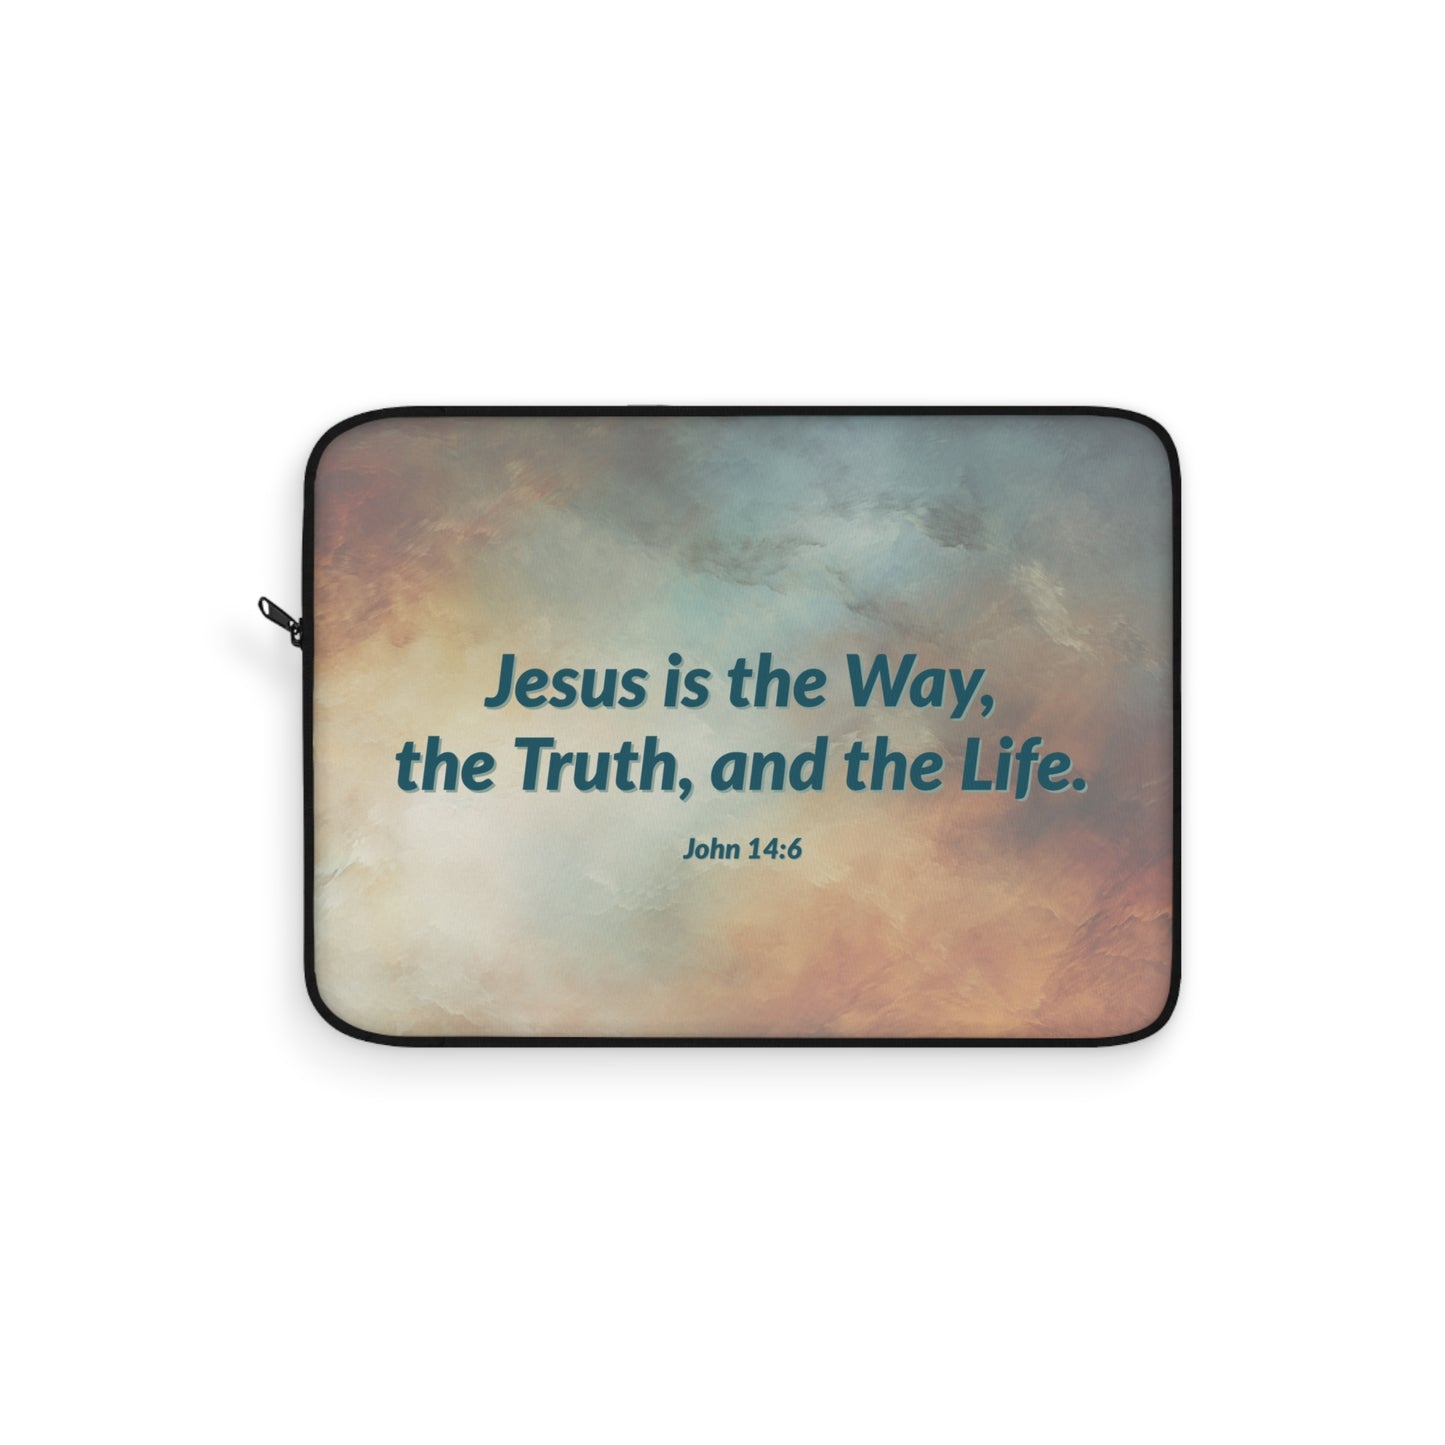 Laptop Sleeve - Jesus is the Way, the Truth, and the Life